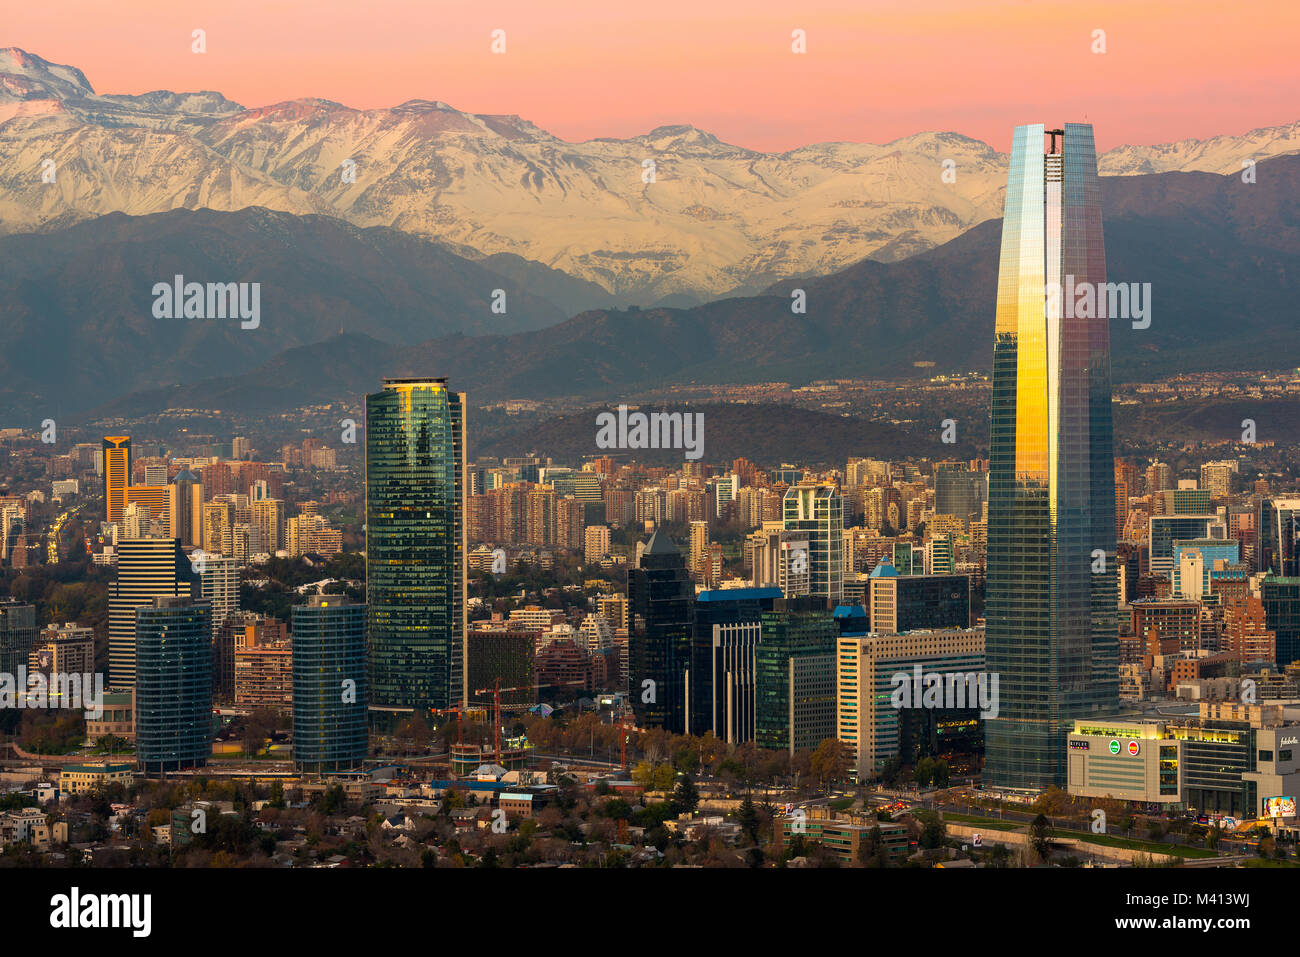 Santiago, Region Metropolitana, Chile - Skyline of modern buildings at financial district with The Andes mountain range in the back. Stock Photo